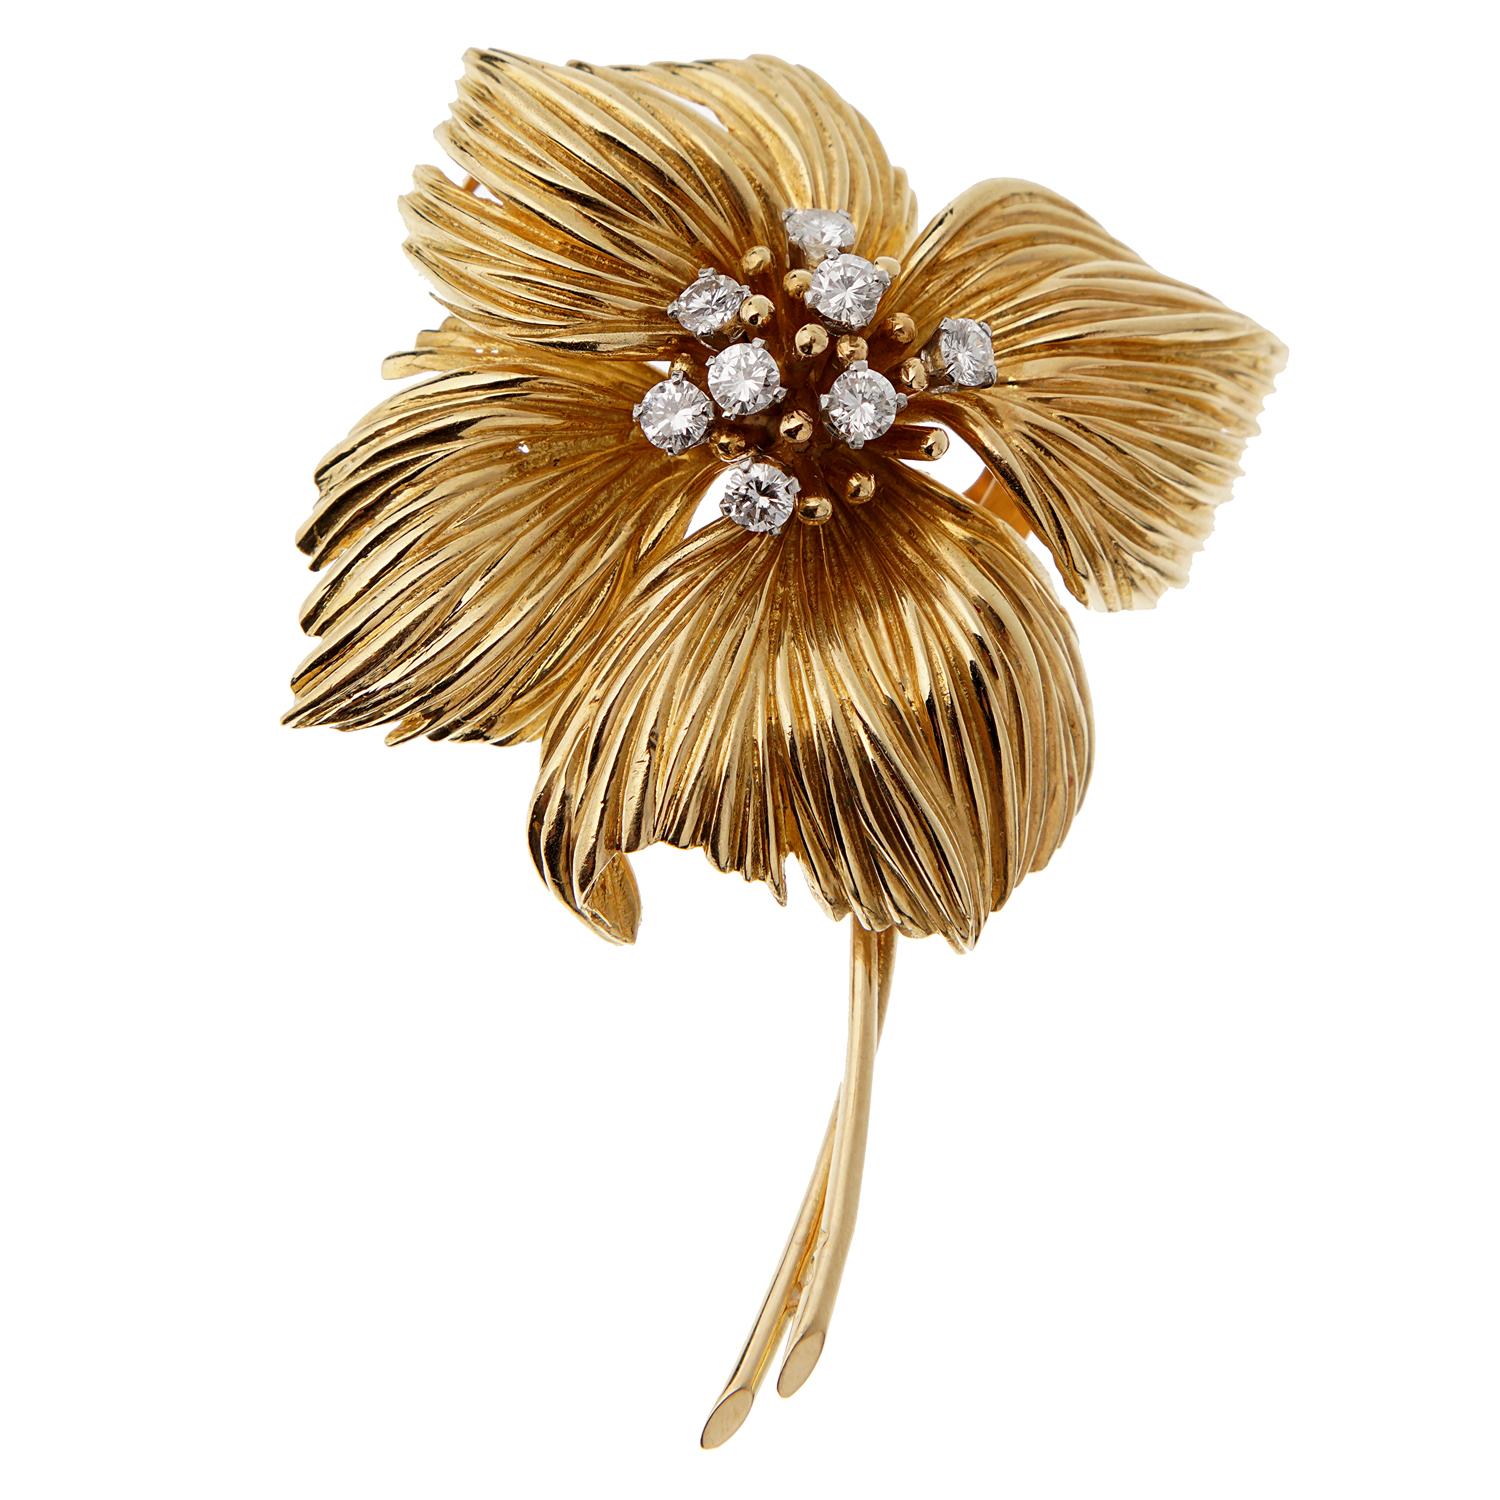 An incredible Van Cleef and Arpels depicting a flower in 18k yellow gold, the brooch is adorned with round brilliant cut diamonds. The brooch can be worn as a pendant as well and measures 2 1/4